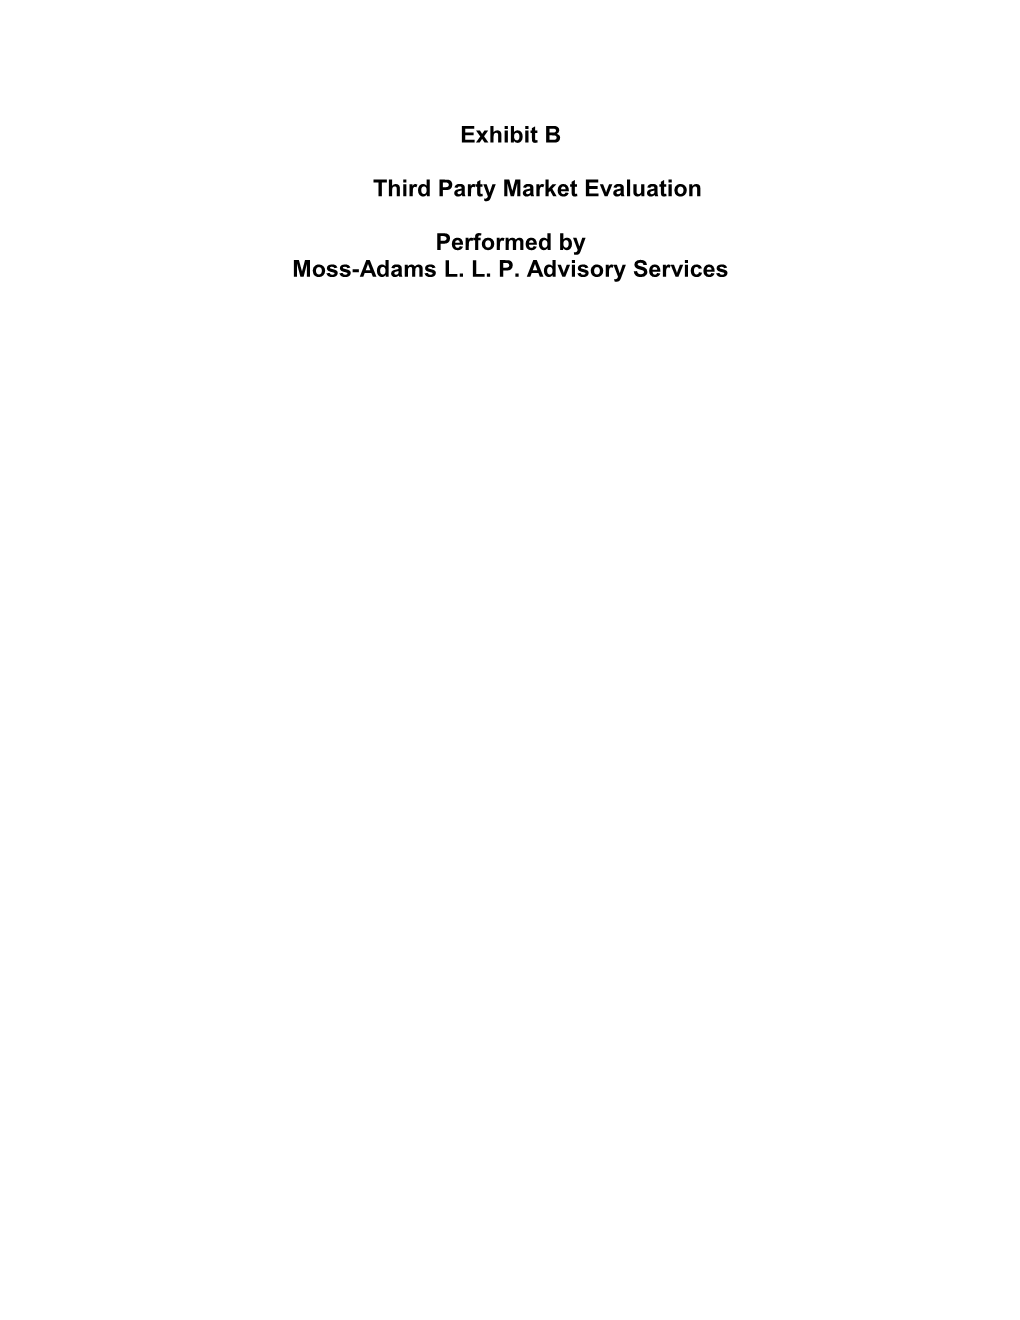 Third Party Market Evaluation